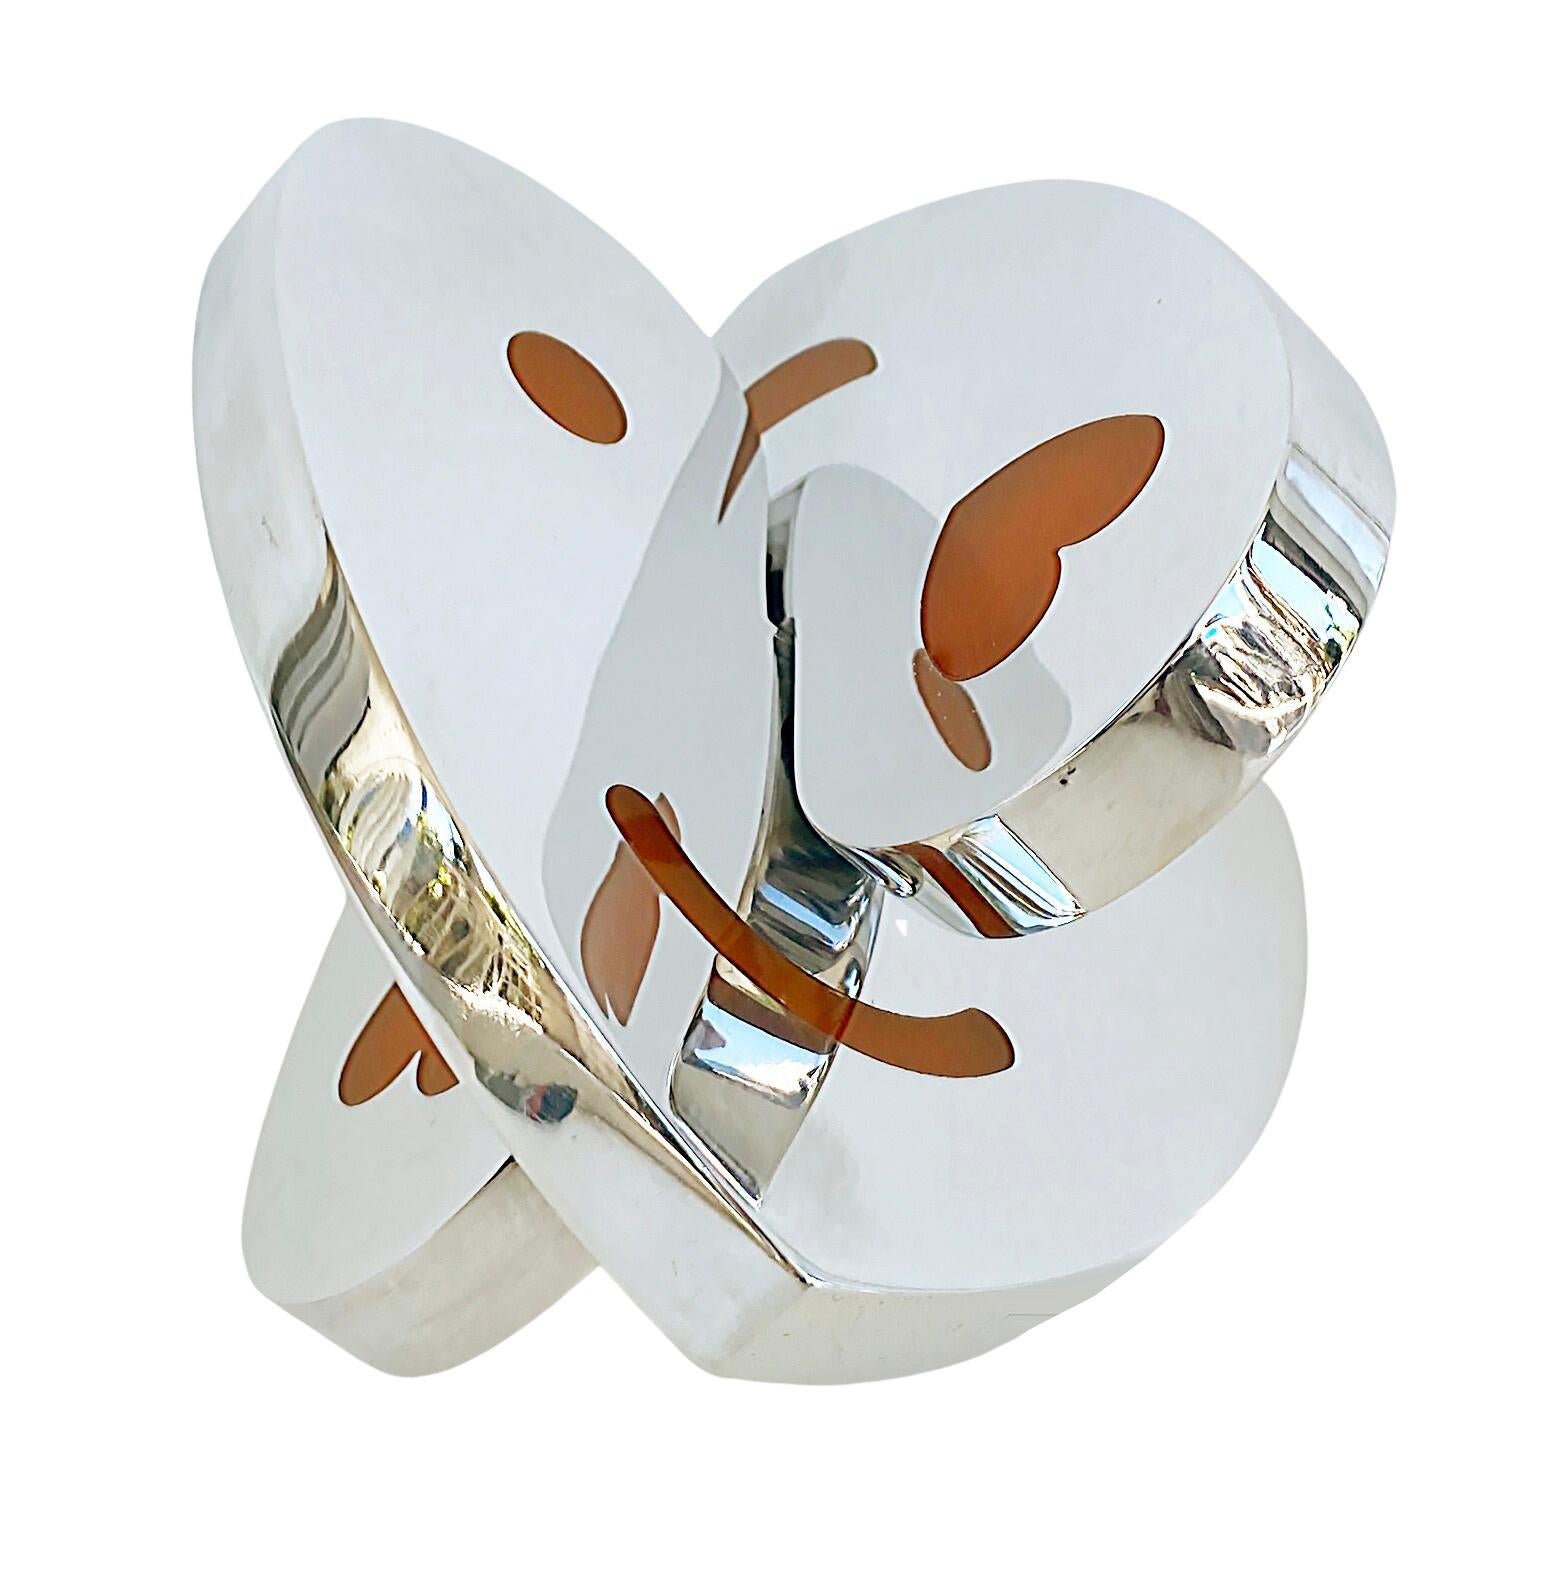  Michael Gitter Aluminum and Epoxy Resin Interlocking Hearts Sculpture 

Offered for sale is a polished aluminum and epoxy resin interlocking hearts sculpture from the artist Michael Gitter.  This piece is from current production and is